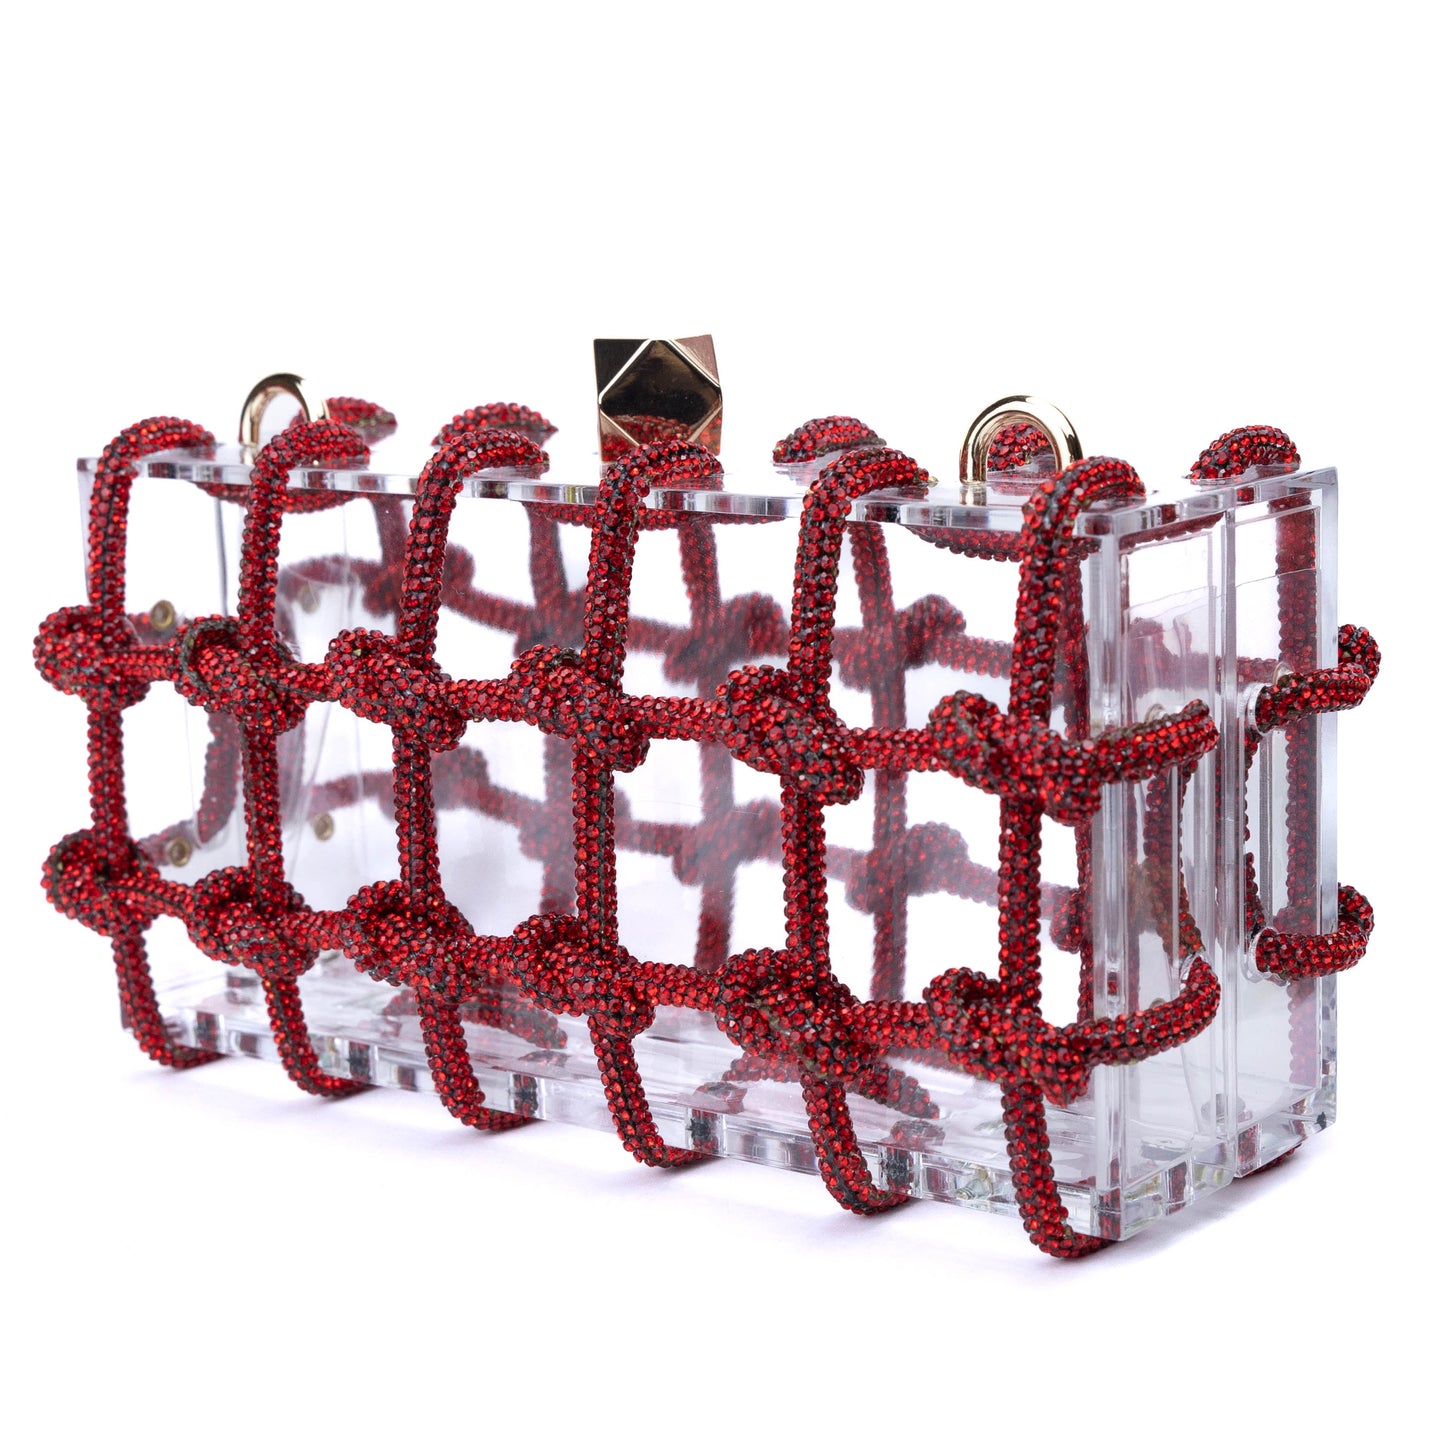 The Clear Crystal Rope Garnet